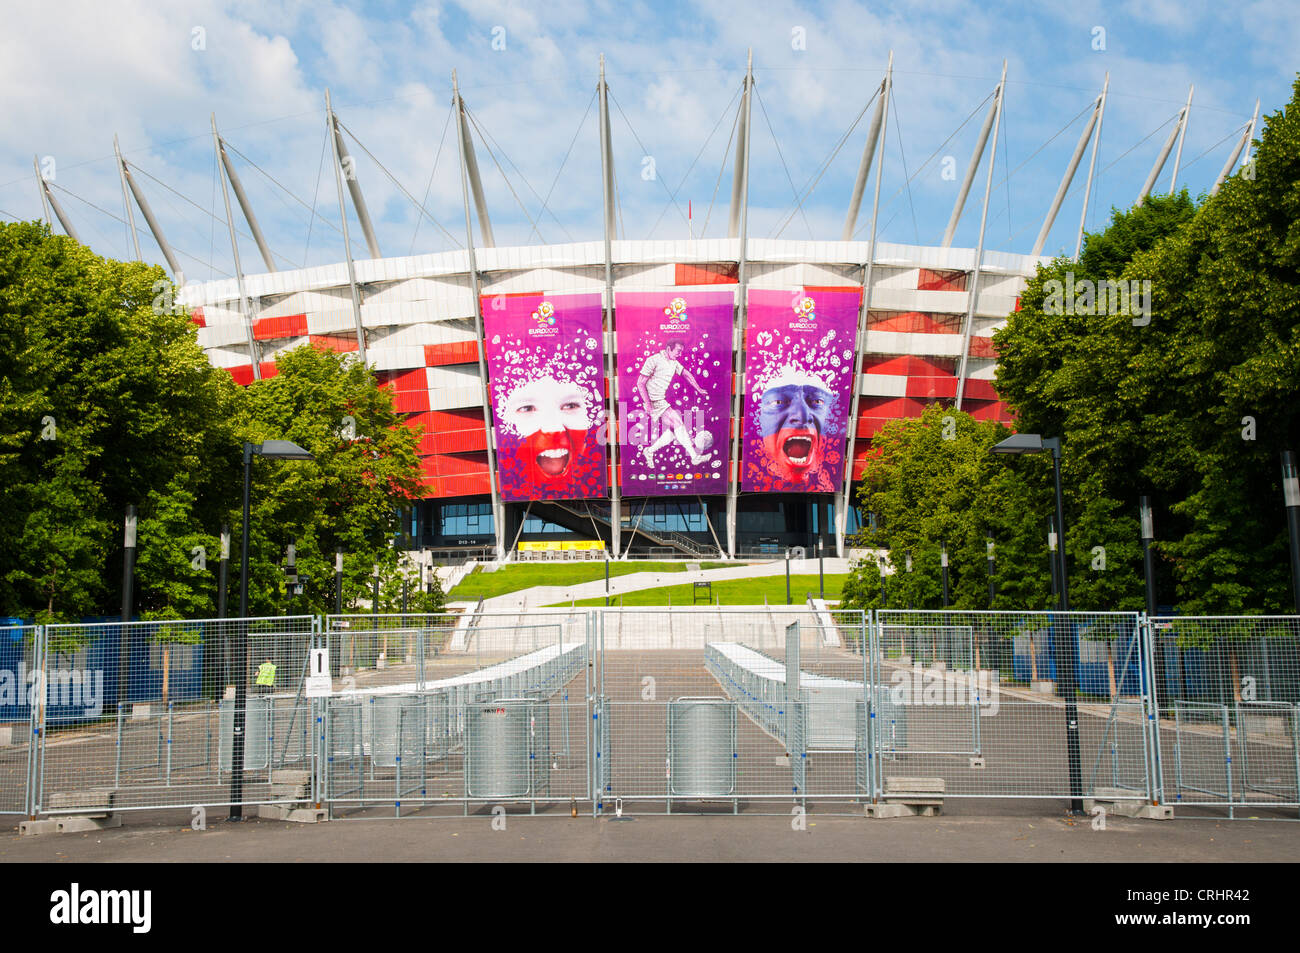 Stadion Narodowy le Stade national (2012) construit pour l'Euro de football district Europe Pologne Varsovie Praga Banque D'Images